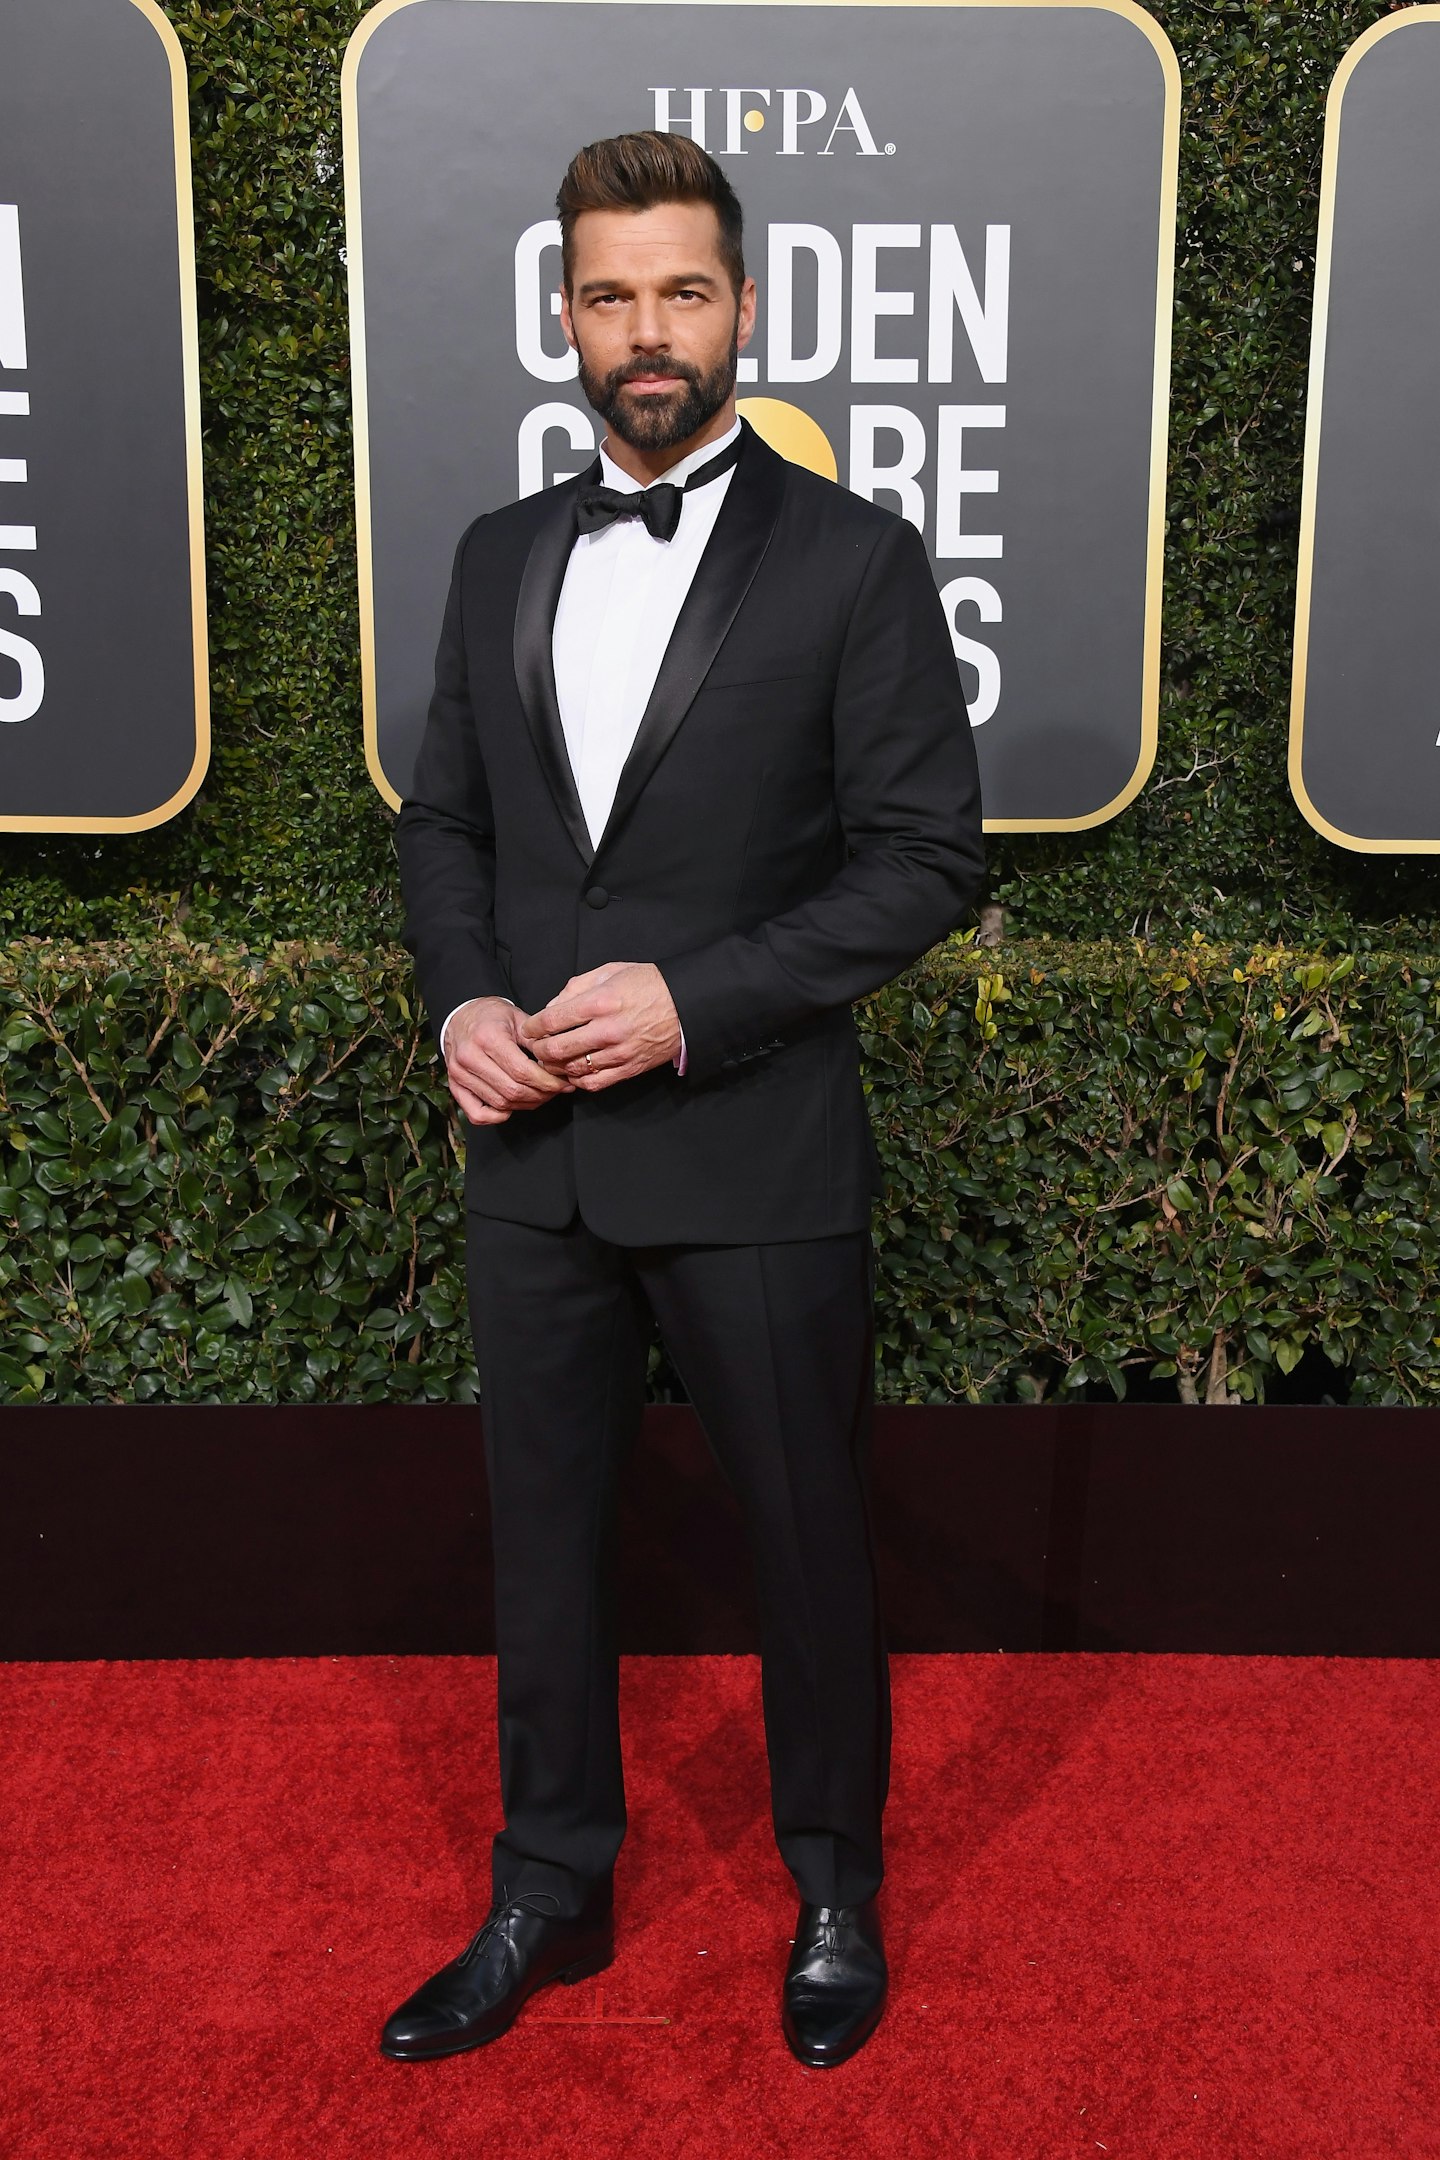 Ricky Martin at the 2019 Golden Globes